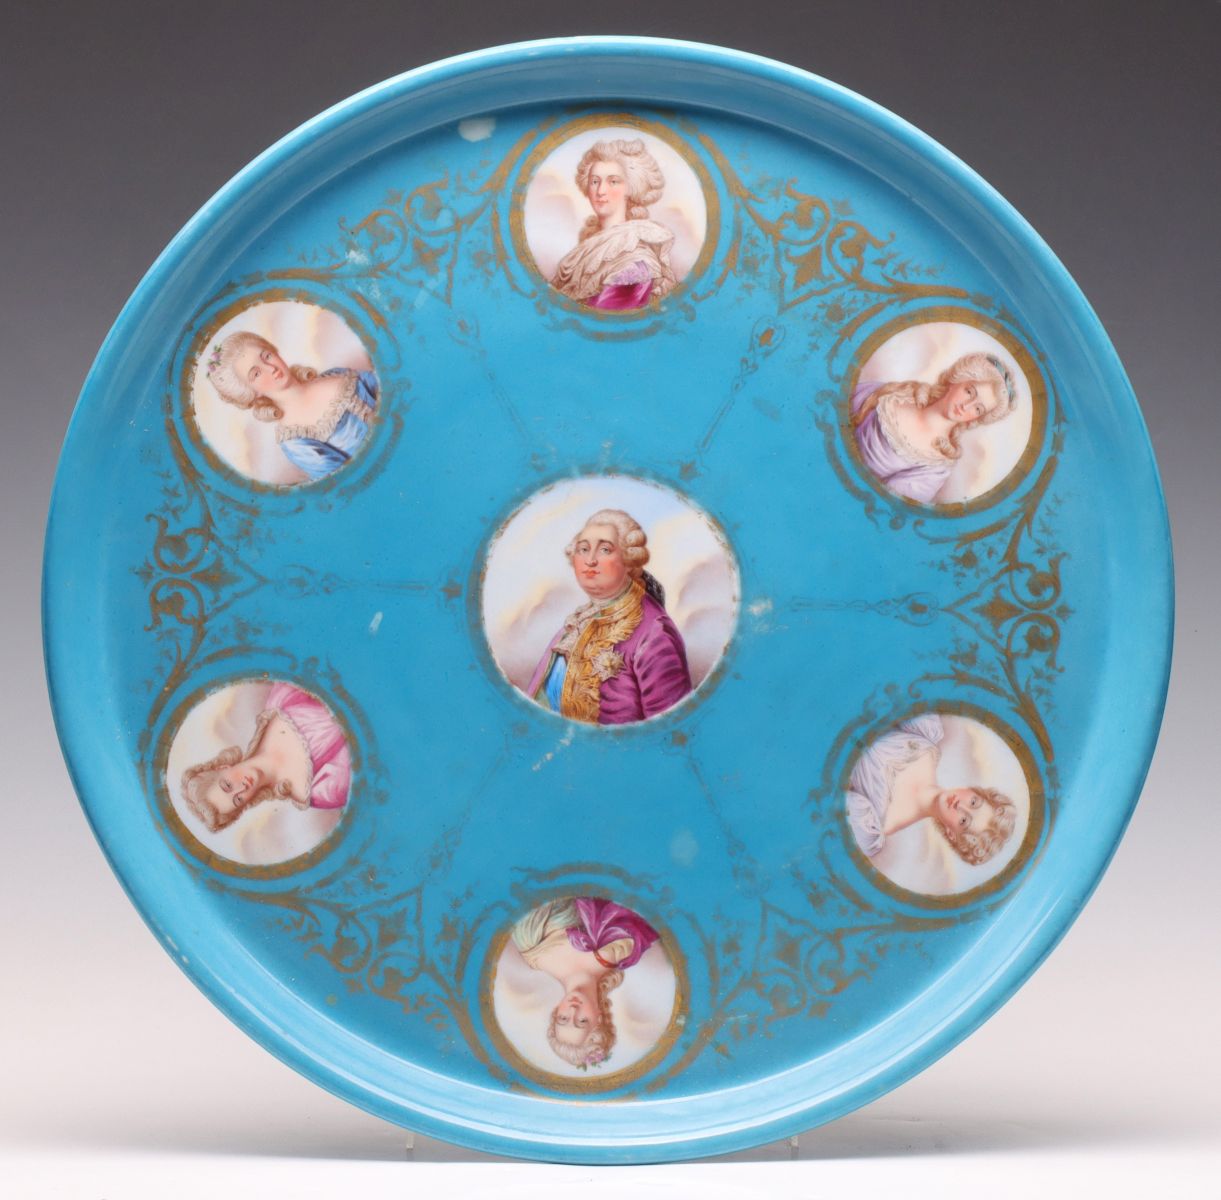 A 19C FRENCH SEVRES PORCELAIN LOUIS XVI CHARGER